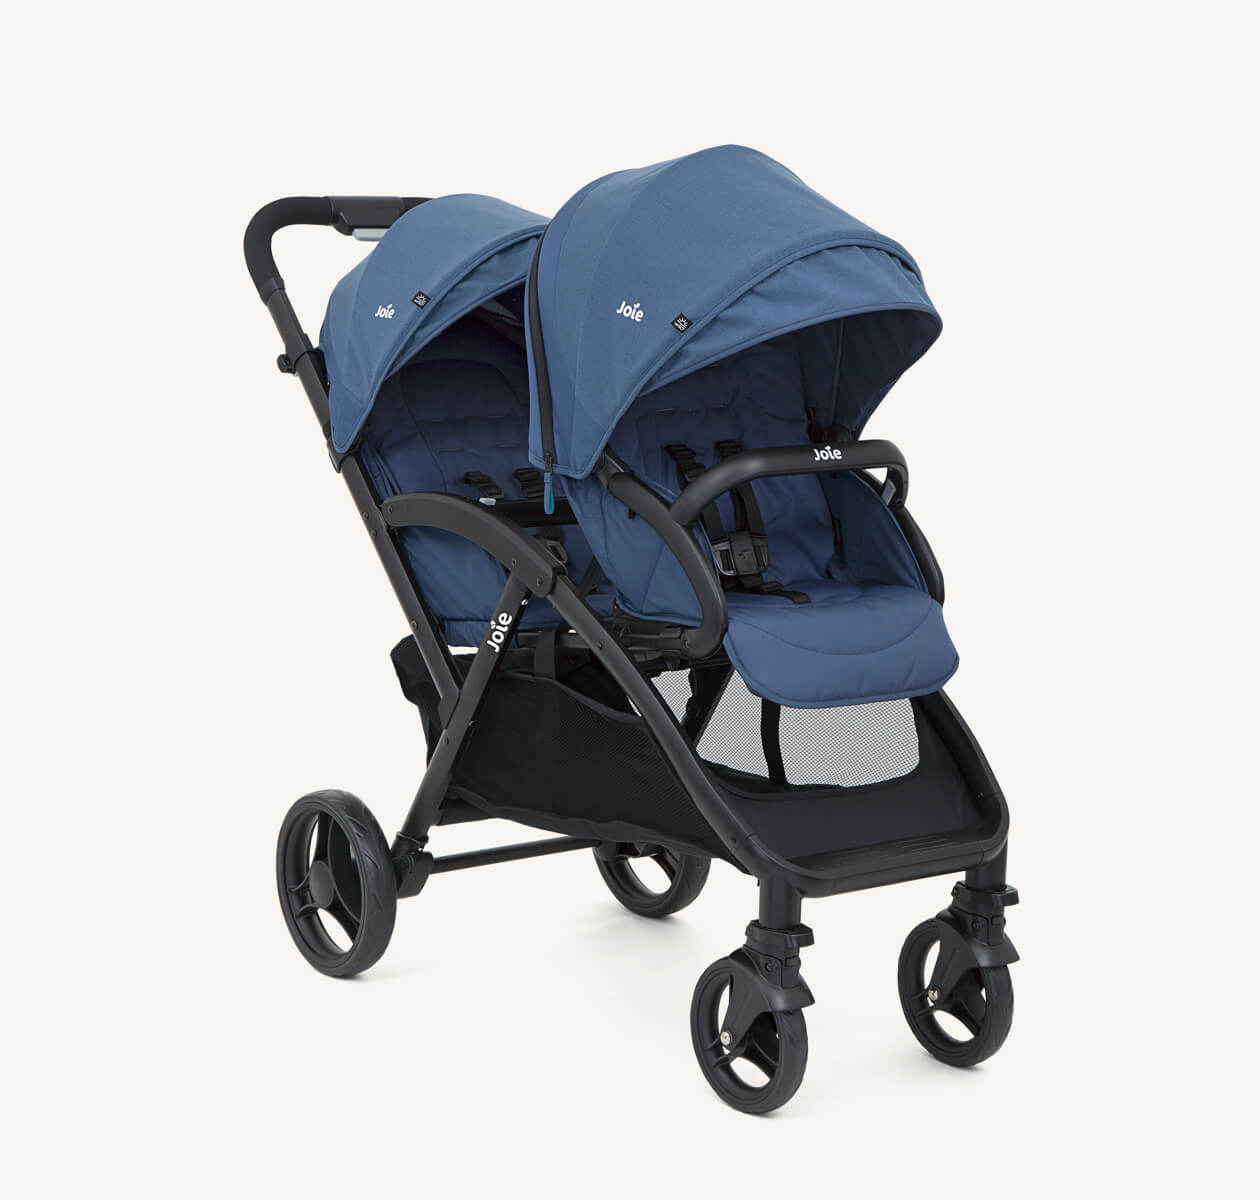 Joie evalite duo double buggy in blue at a right angle.